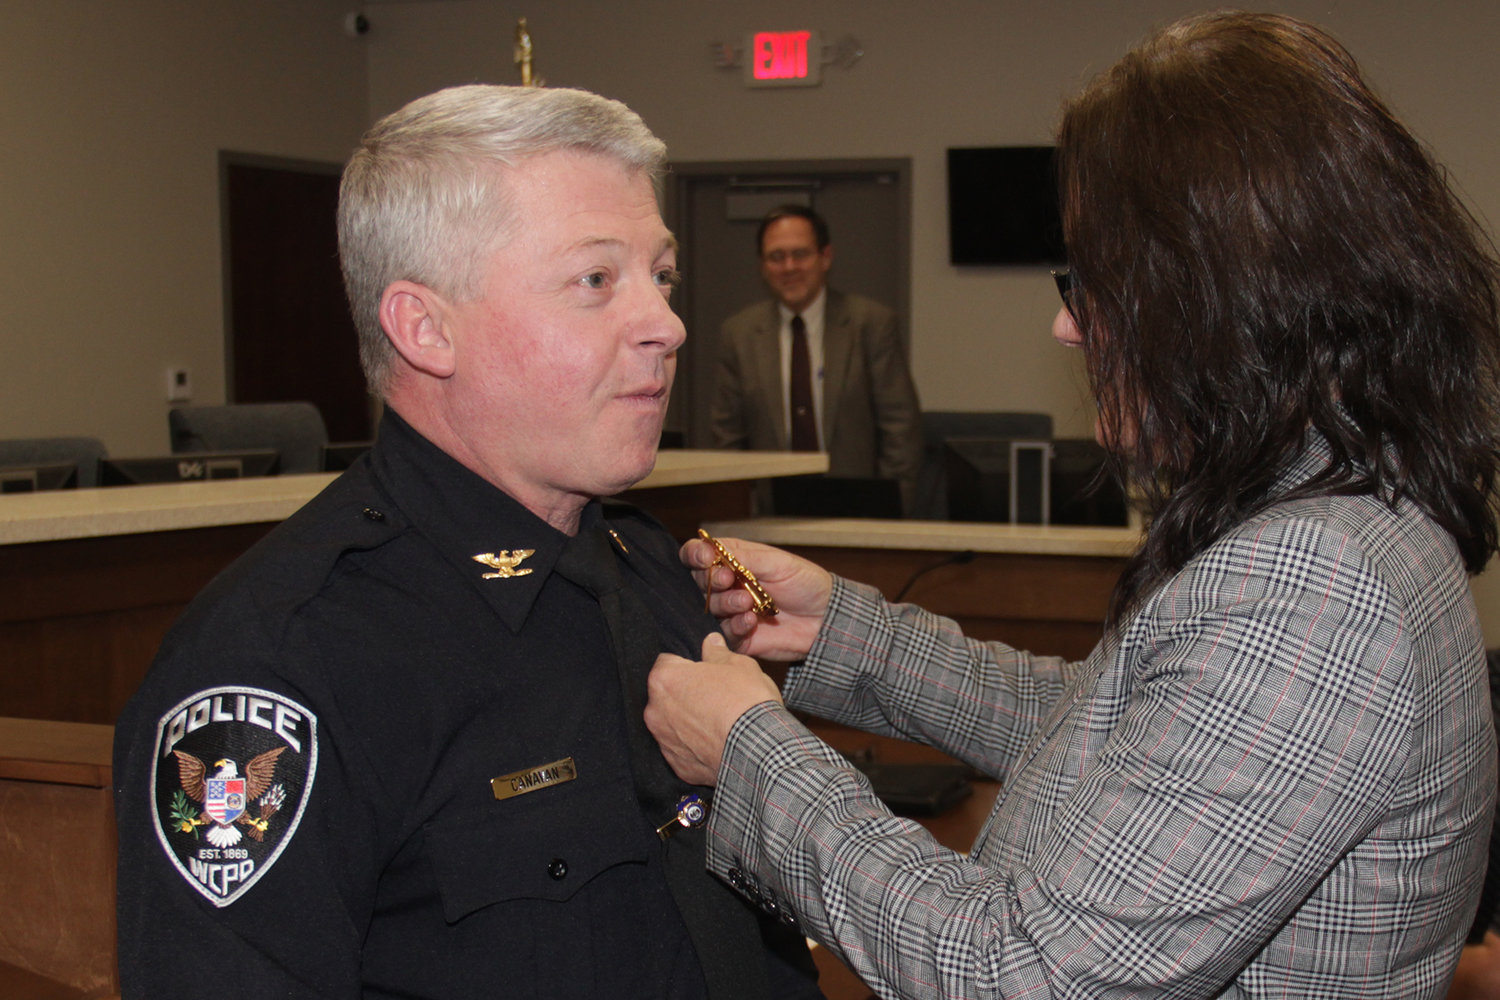 Tom Canavan has the badge of Wright City Police Chief pinned to his uniform by wife Renee Canavan after being officially sworn into office on Jan. 13 at Wright City Hall.